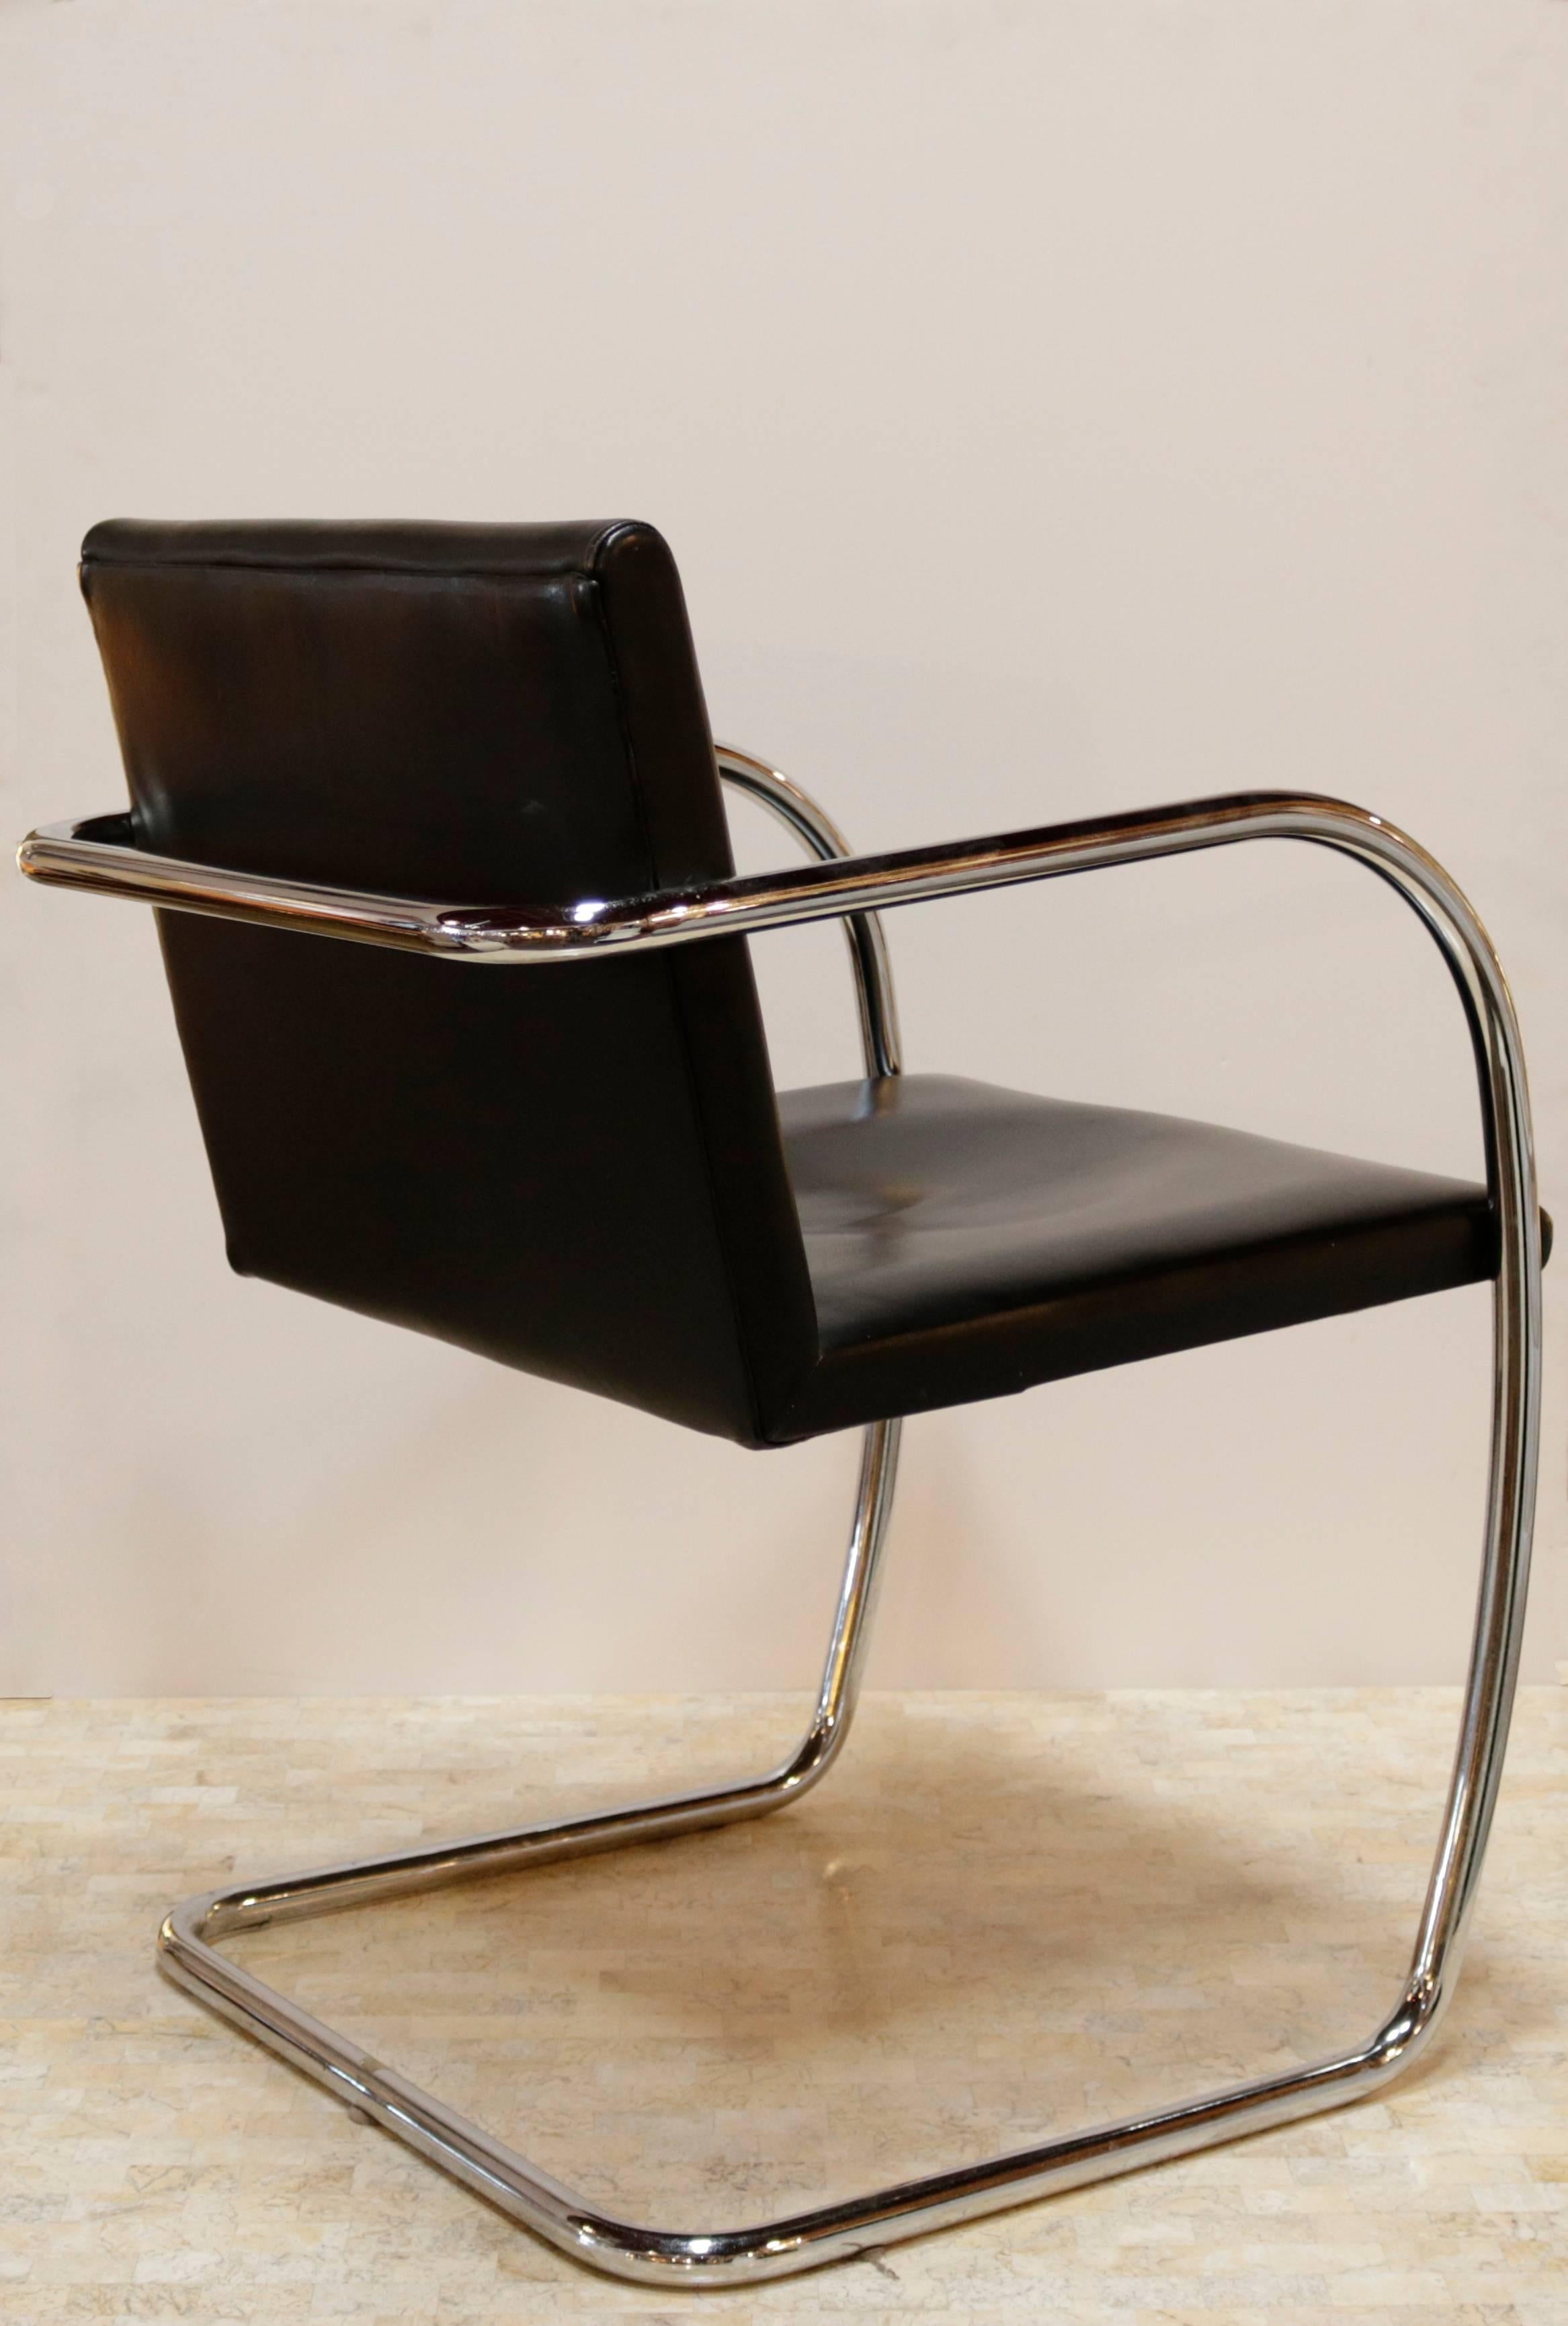 American Pair of Black Leather and Chrome Brno Chairs by Mies van der Rohe